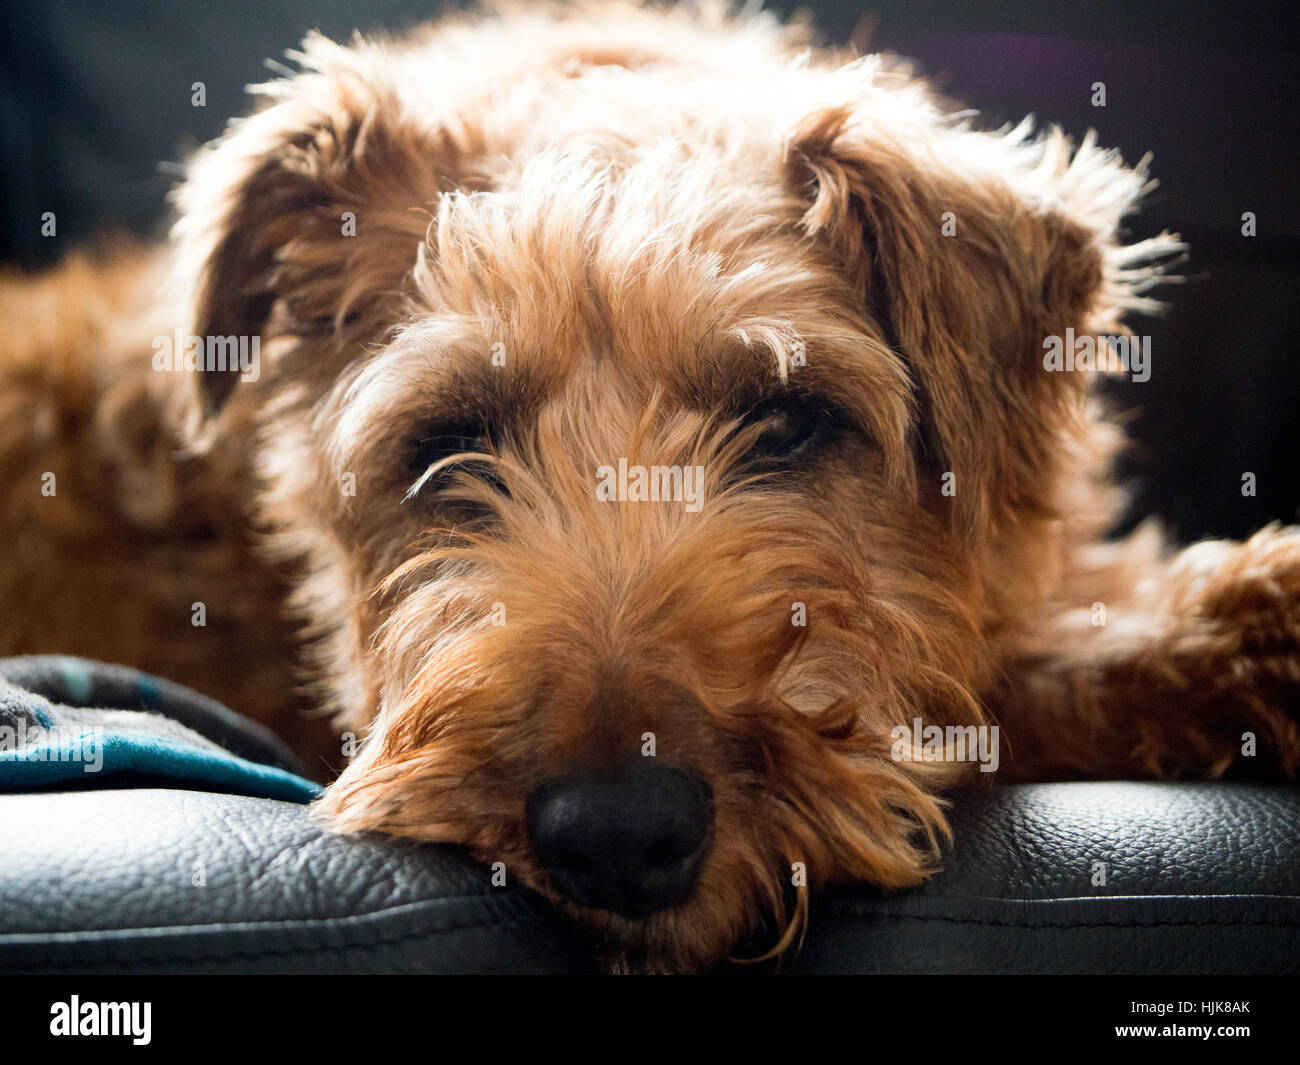 An Irish Terrier dog looking very relaxed on a black leather sofa Stock Photo